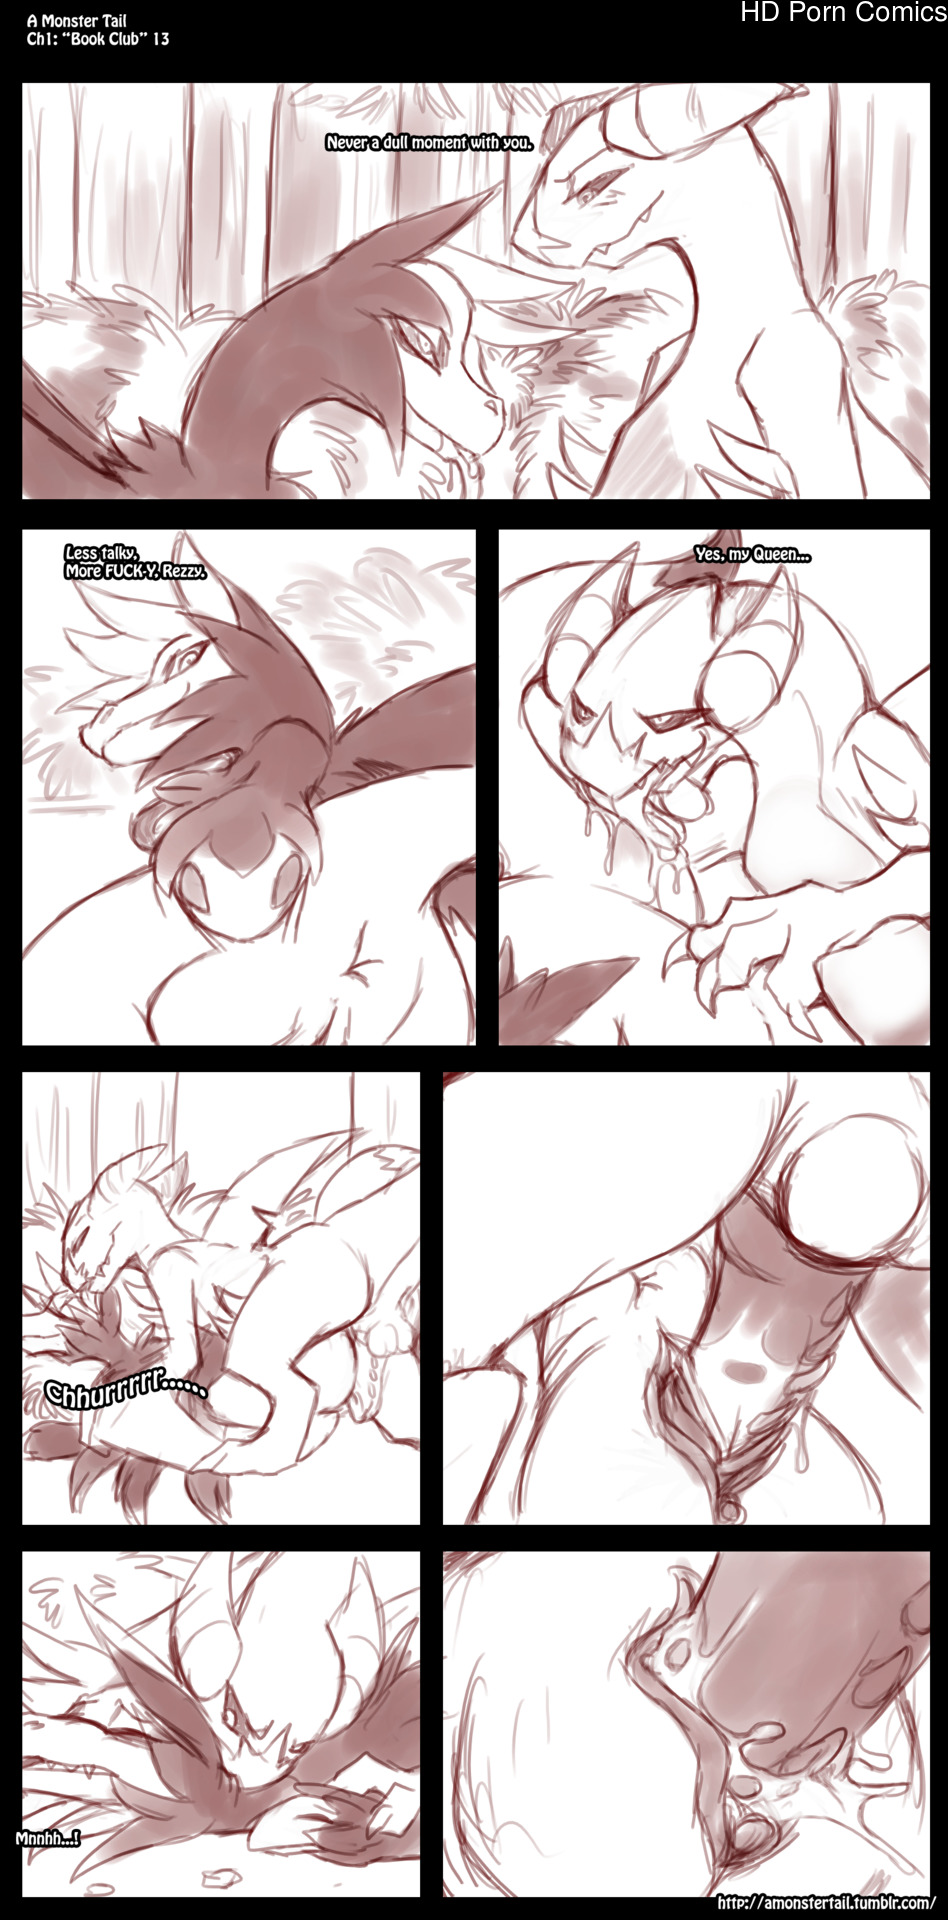 Monster Pulse Porn - Monster Tail [Ongoing] comic porn - HD Porn Comics